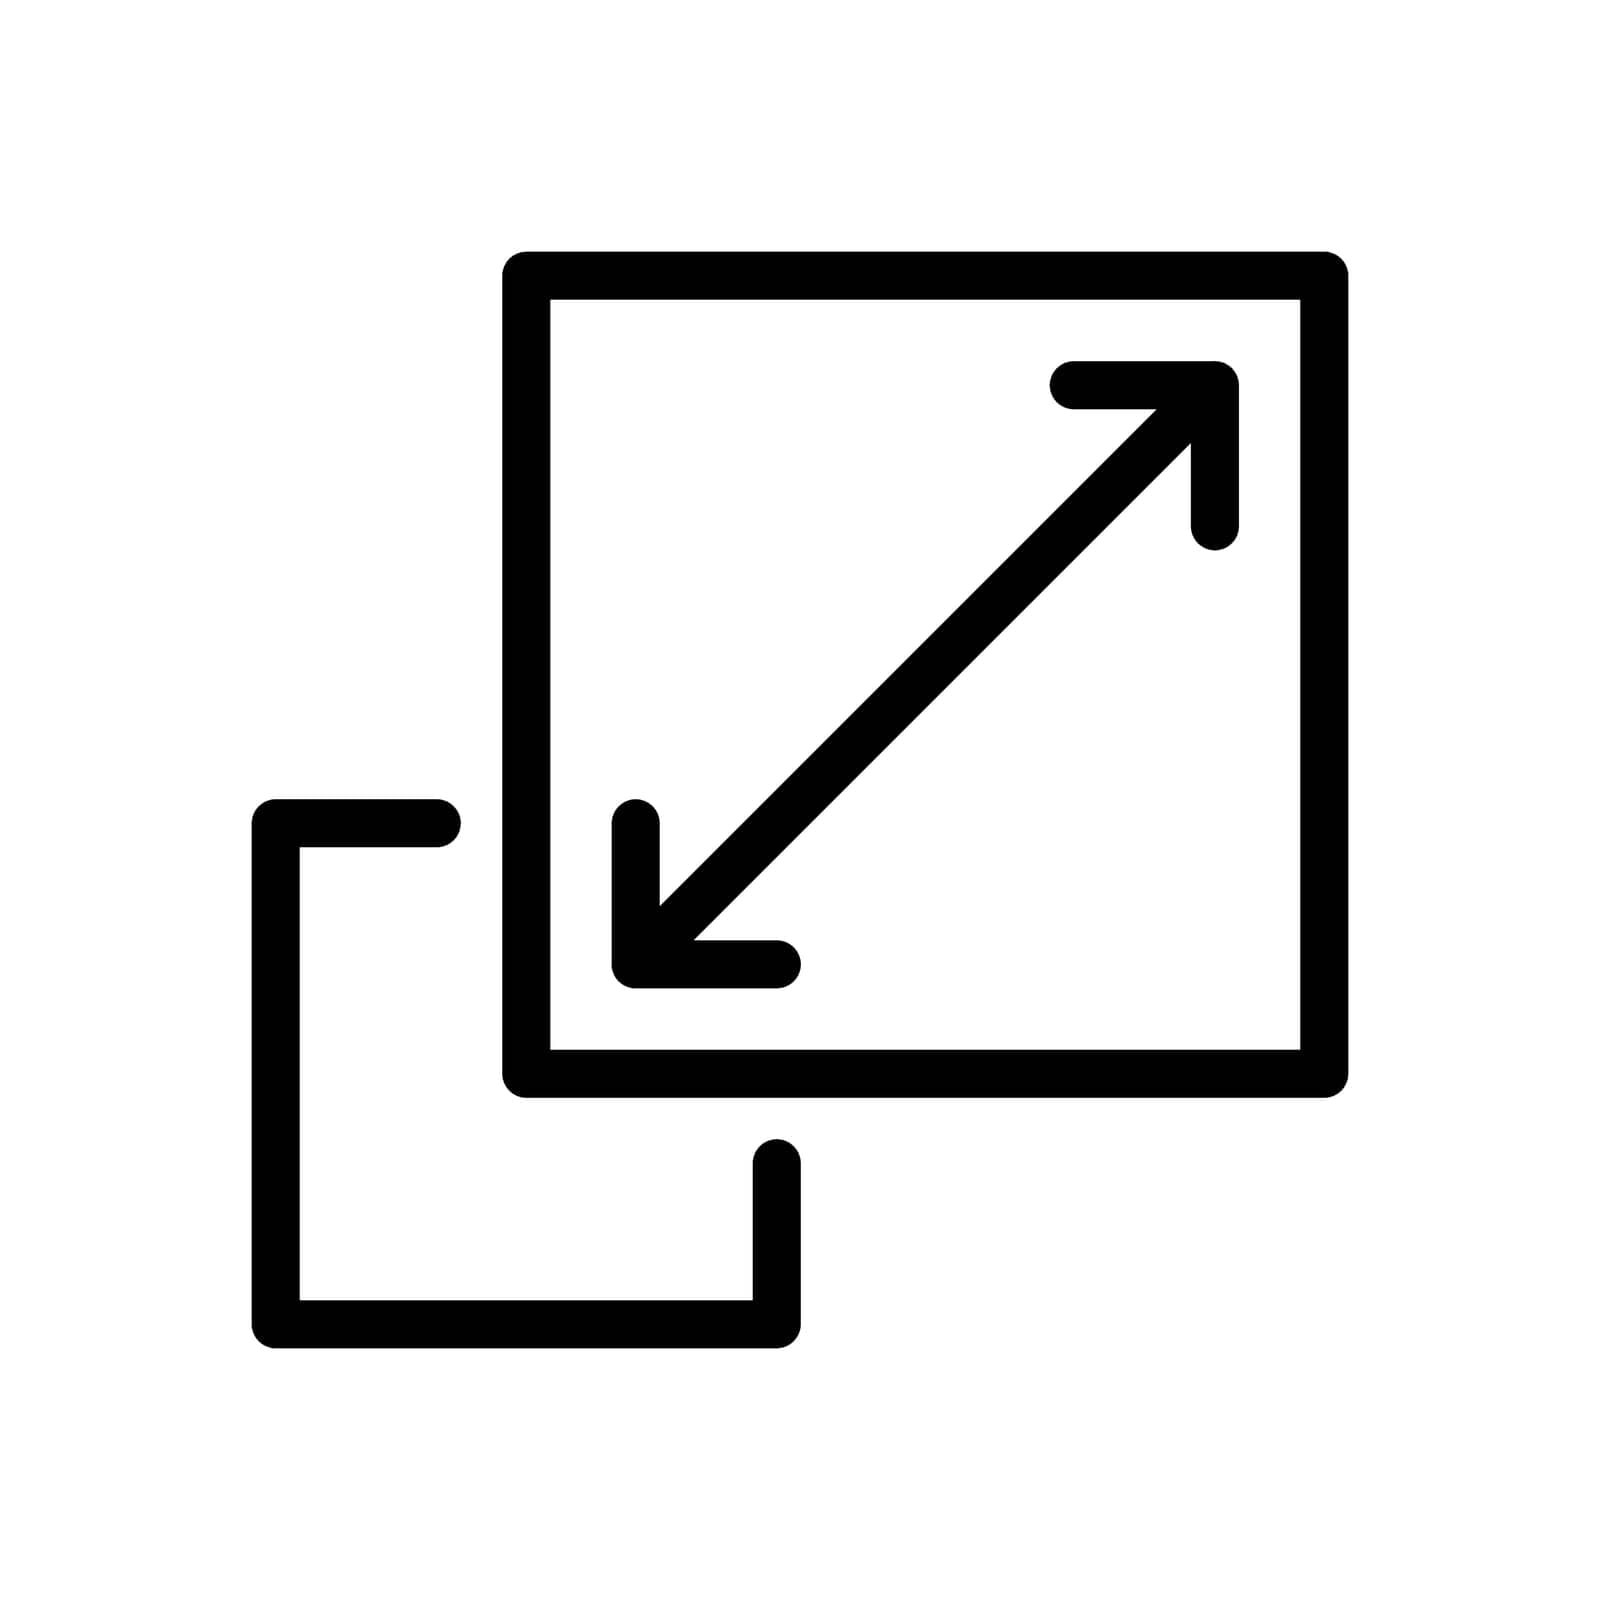 Scalability icon symbol simple design by misteremil